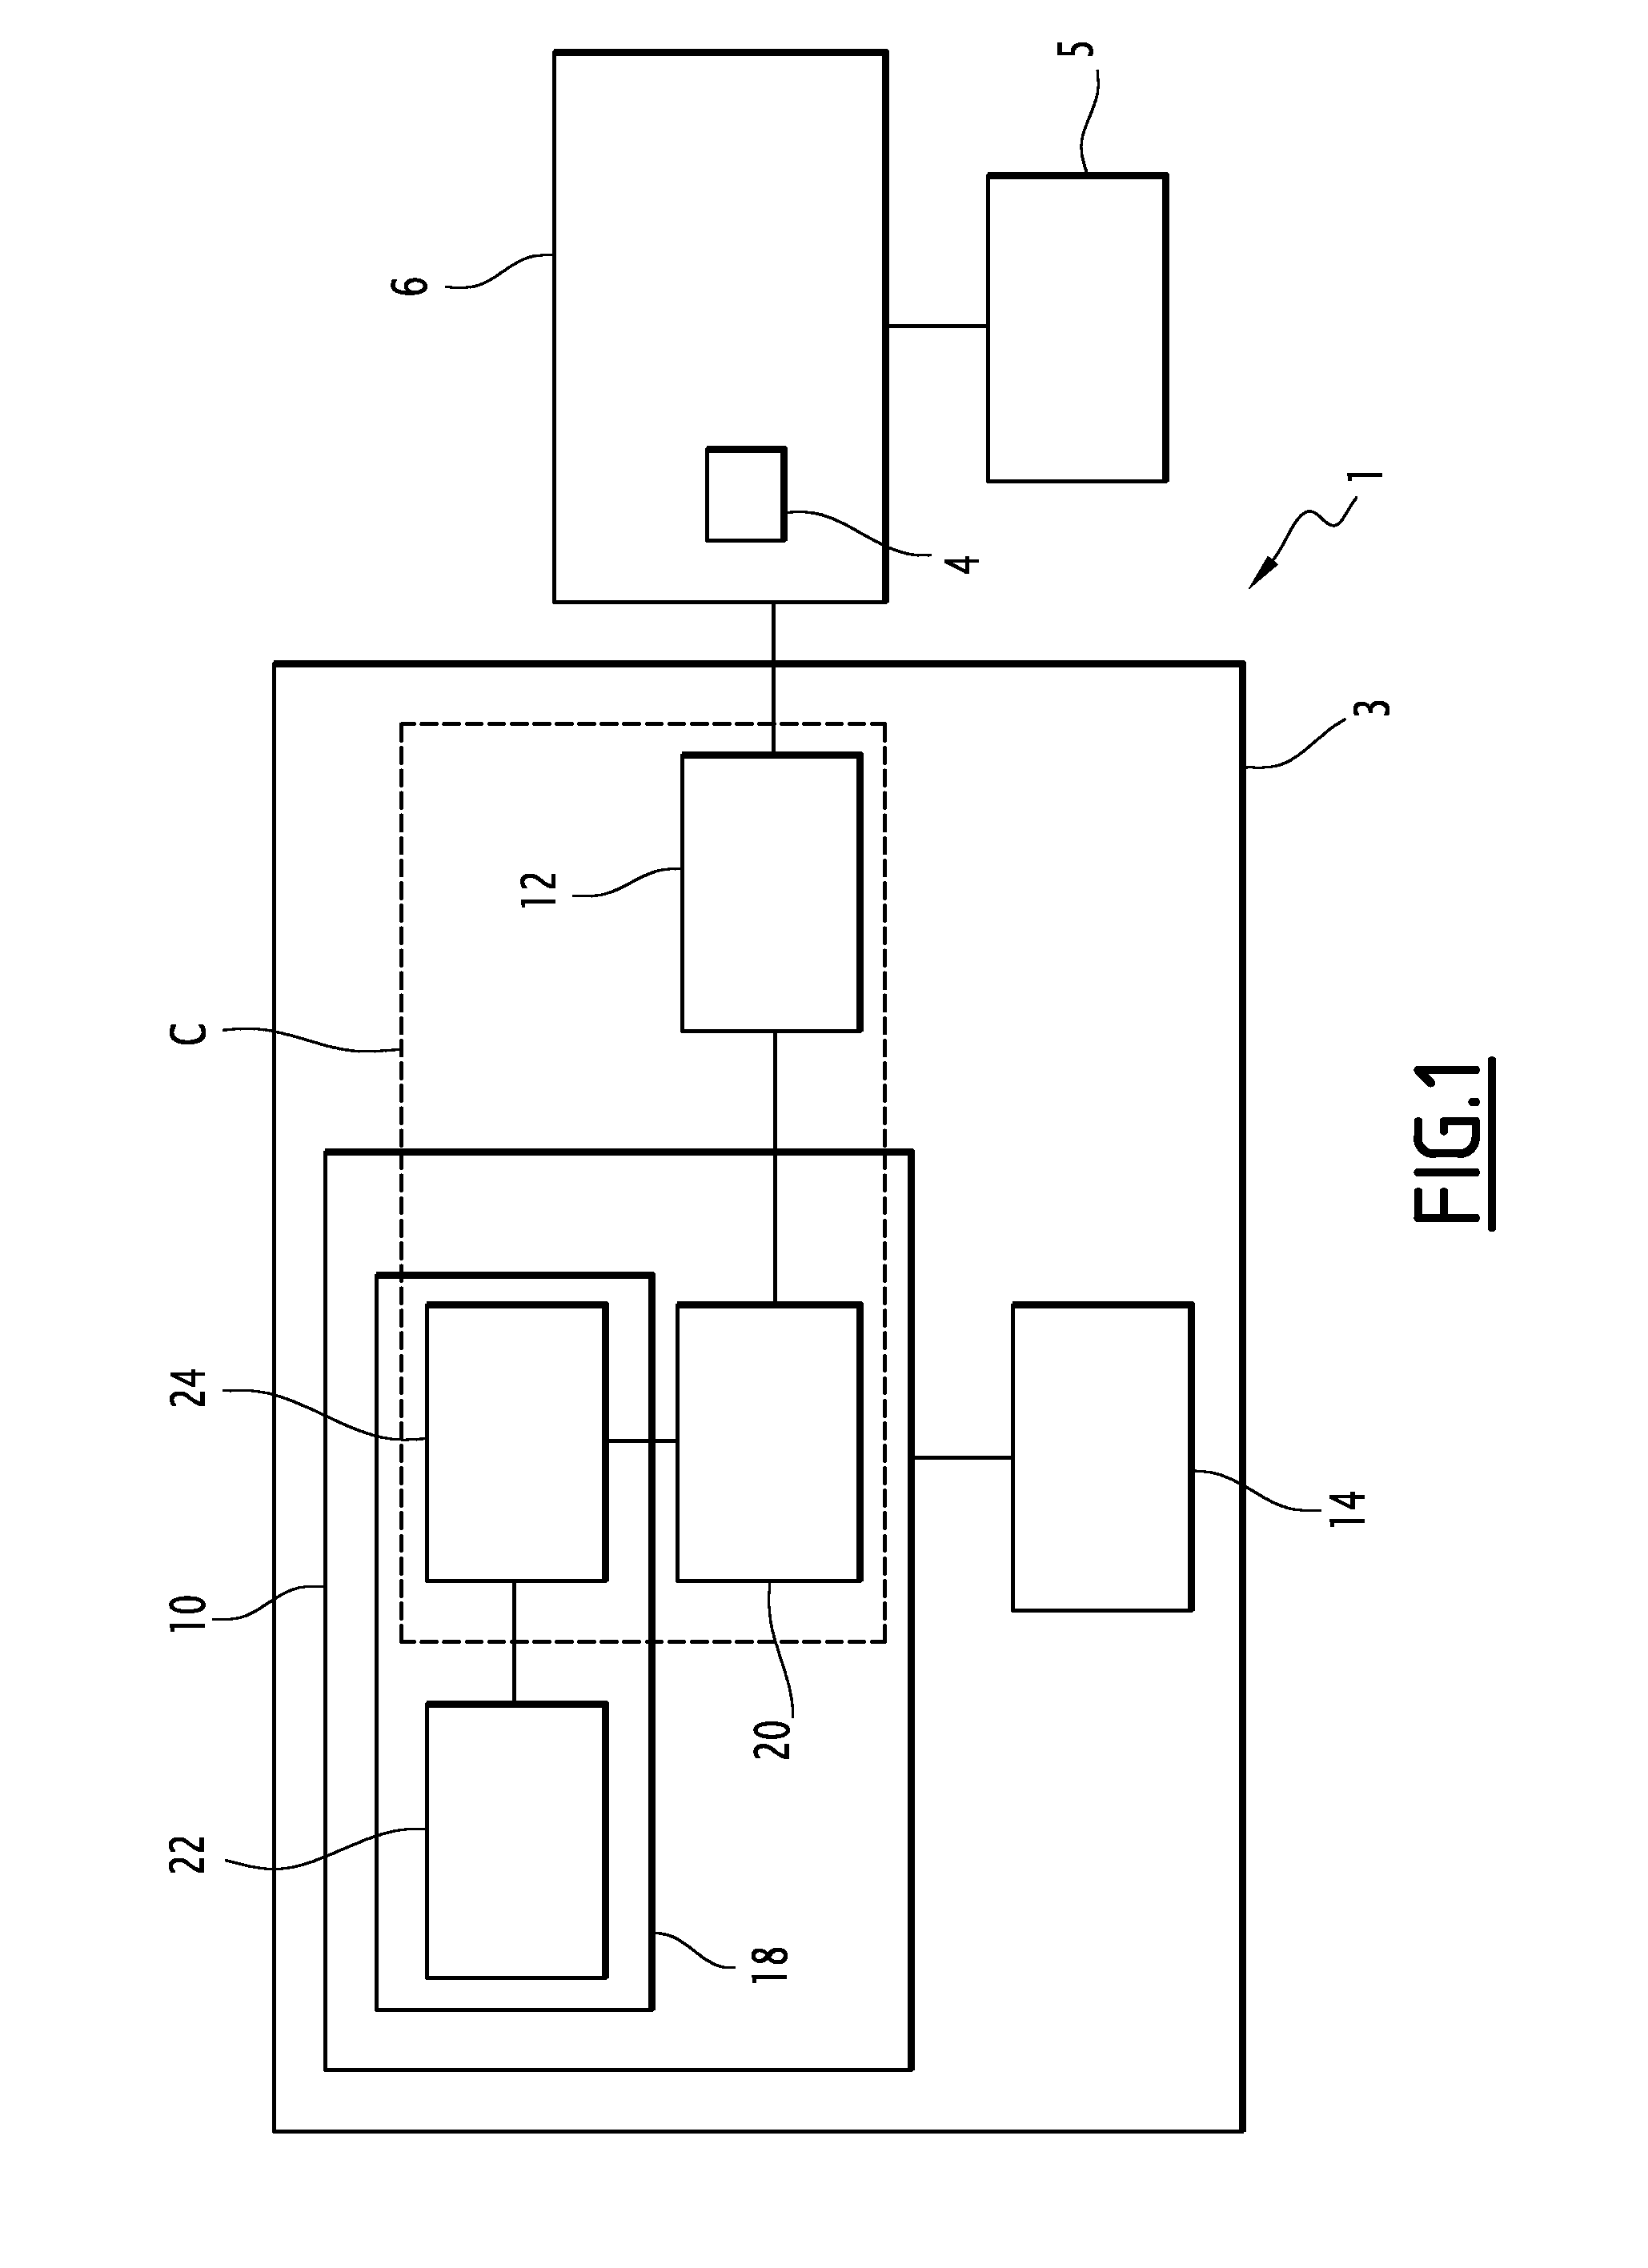 System and method for controlling the position of a movable object on a viewing device